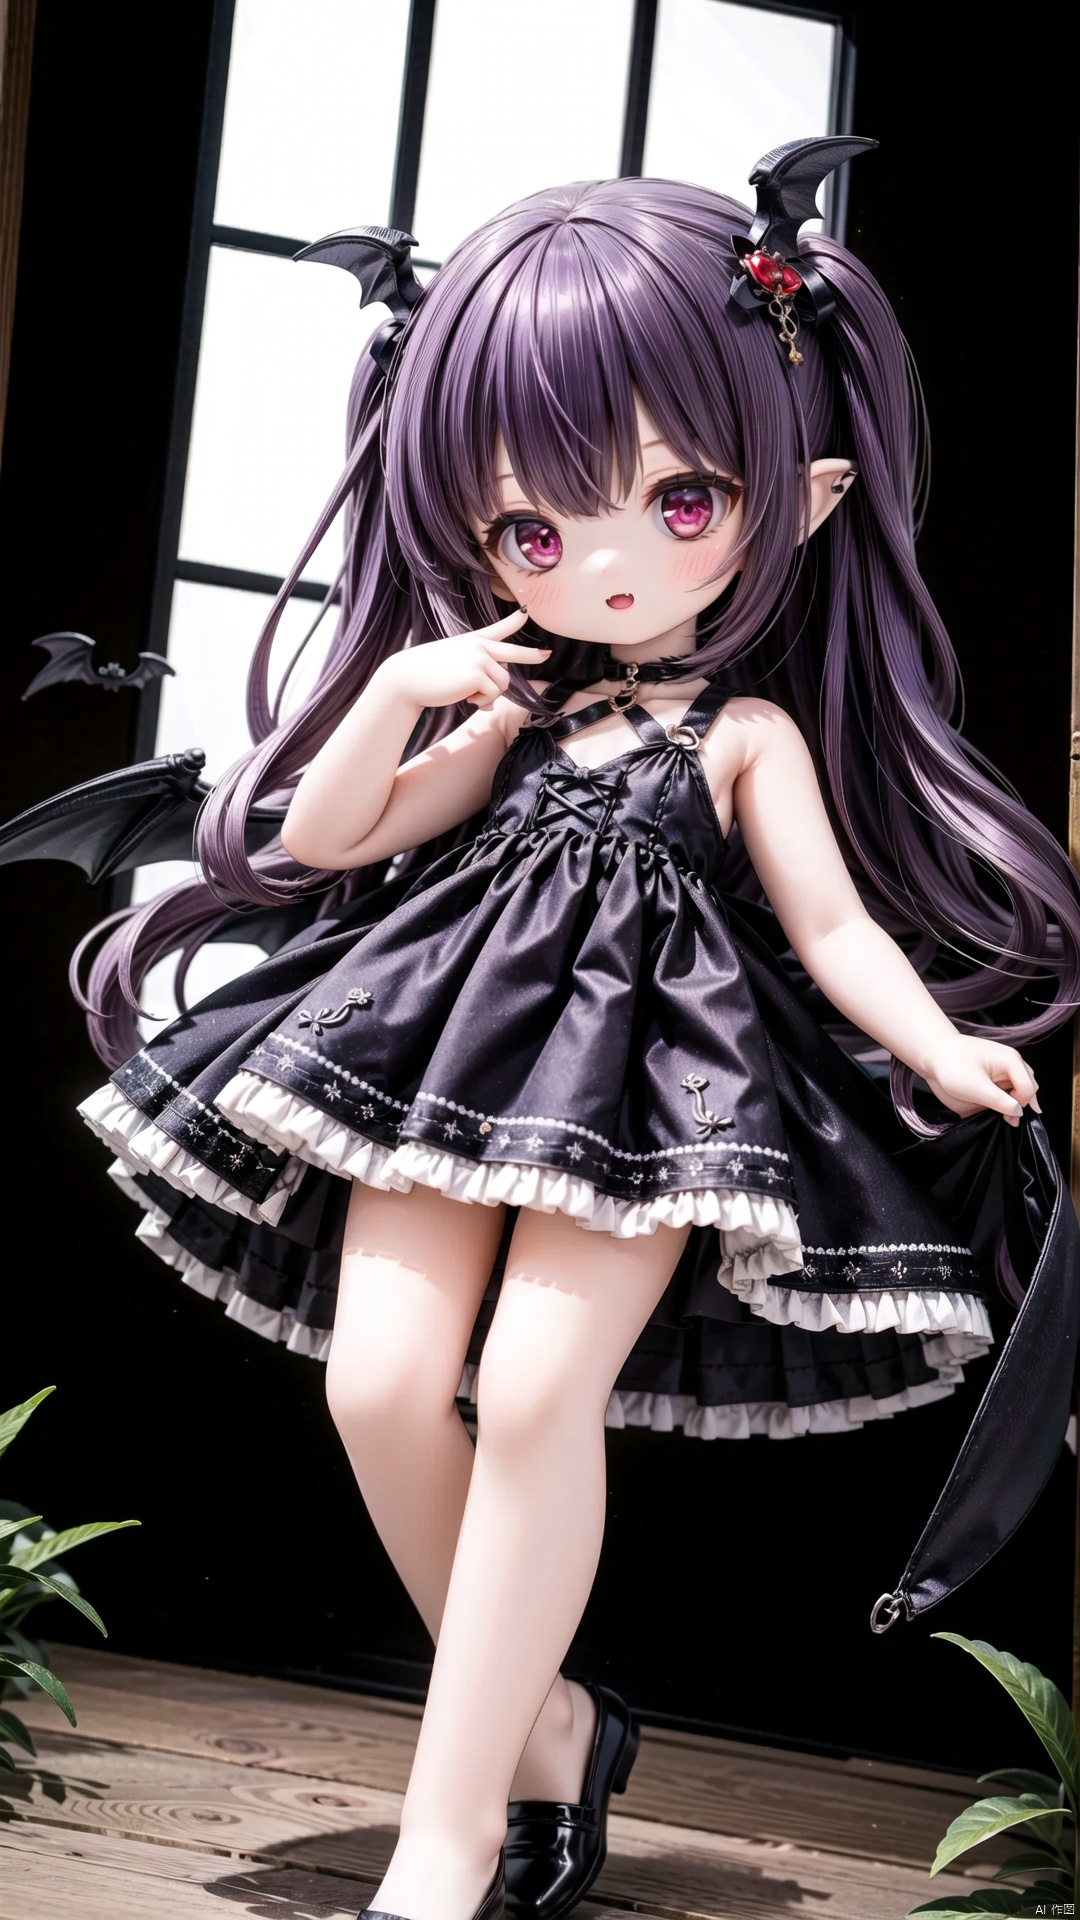 koakuma,female child,Little girl（1.5）,aged down,beautiful detailed girl,narrow waist,small breasts,Glowing skin,steaming body,demon horns,bat wings,transparent wings,Delicate cute face,Black and red Gothic skirt,fine fabric emphasis,ornate clothes,red Eyes,beautiful detailed eyes,Glowing eyes,one eye closed,((Deep purple hair)),long hair,wavy hair,glowing hair,Extremely delicate longhair,bat hair ornament,Red Heart Necklace,bare legs,Thin leg,bare arms,Slender fingers,steepled fingers,Shiny nails,mischievous smile(expression),finger to eye,tongue out,fangs out,beautiful detailed lips,bat(ornament),garden, fountain,hyper realistic,magic,8k,incredible quality,best quality,masterpiece,highly detailed,extremely detailed CG,cinematic lighting